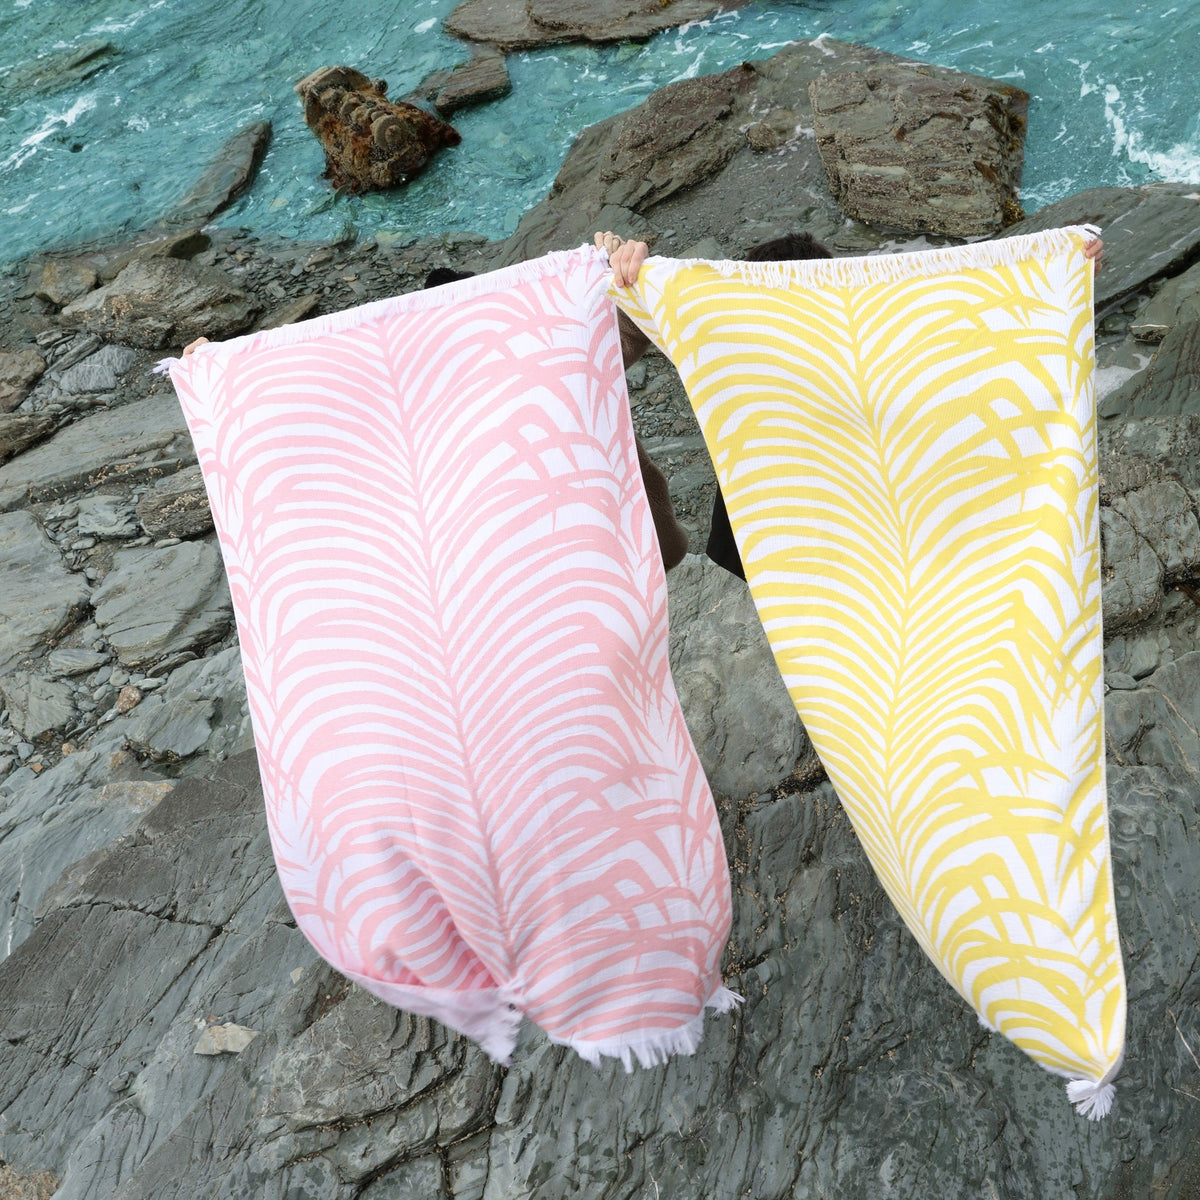 Matouk Zebra Palm Beach Towels in Color Flamingo and Canary by the Ocean